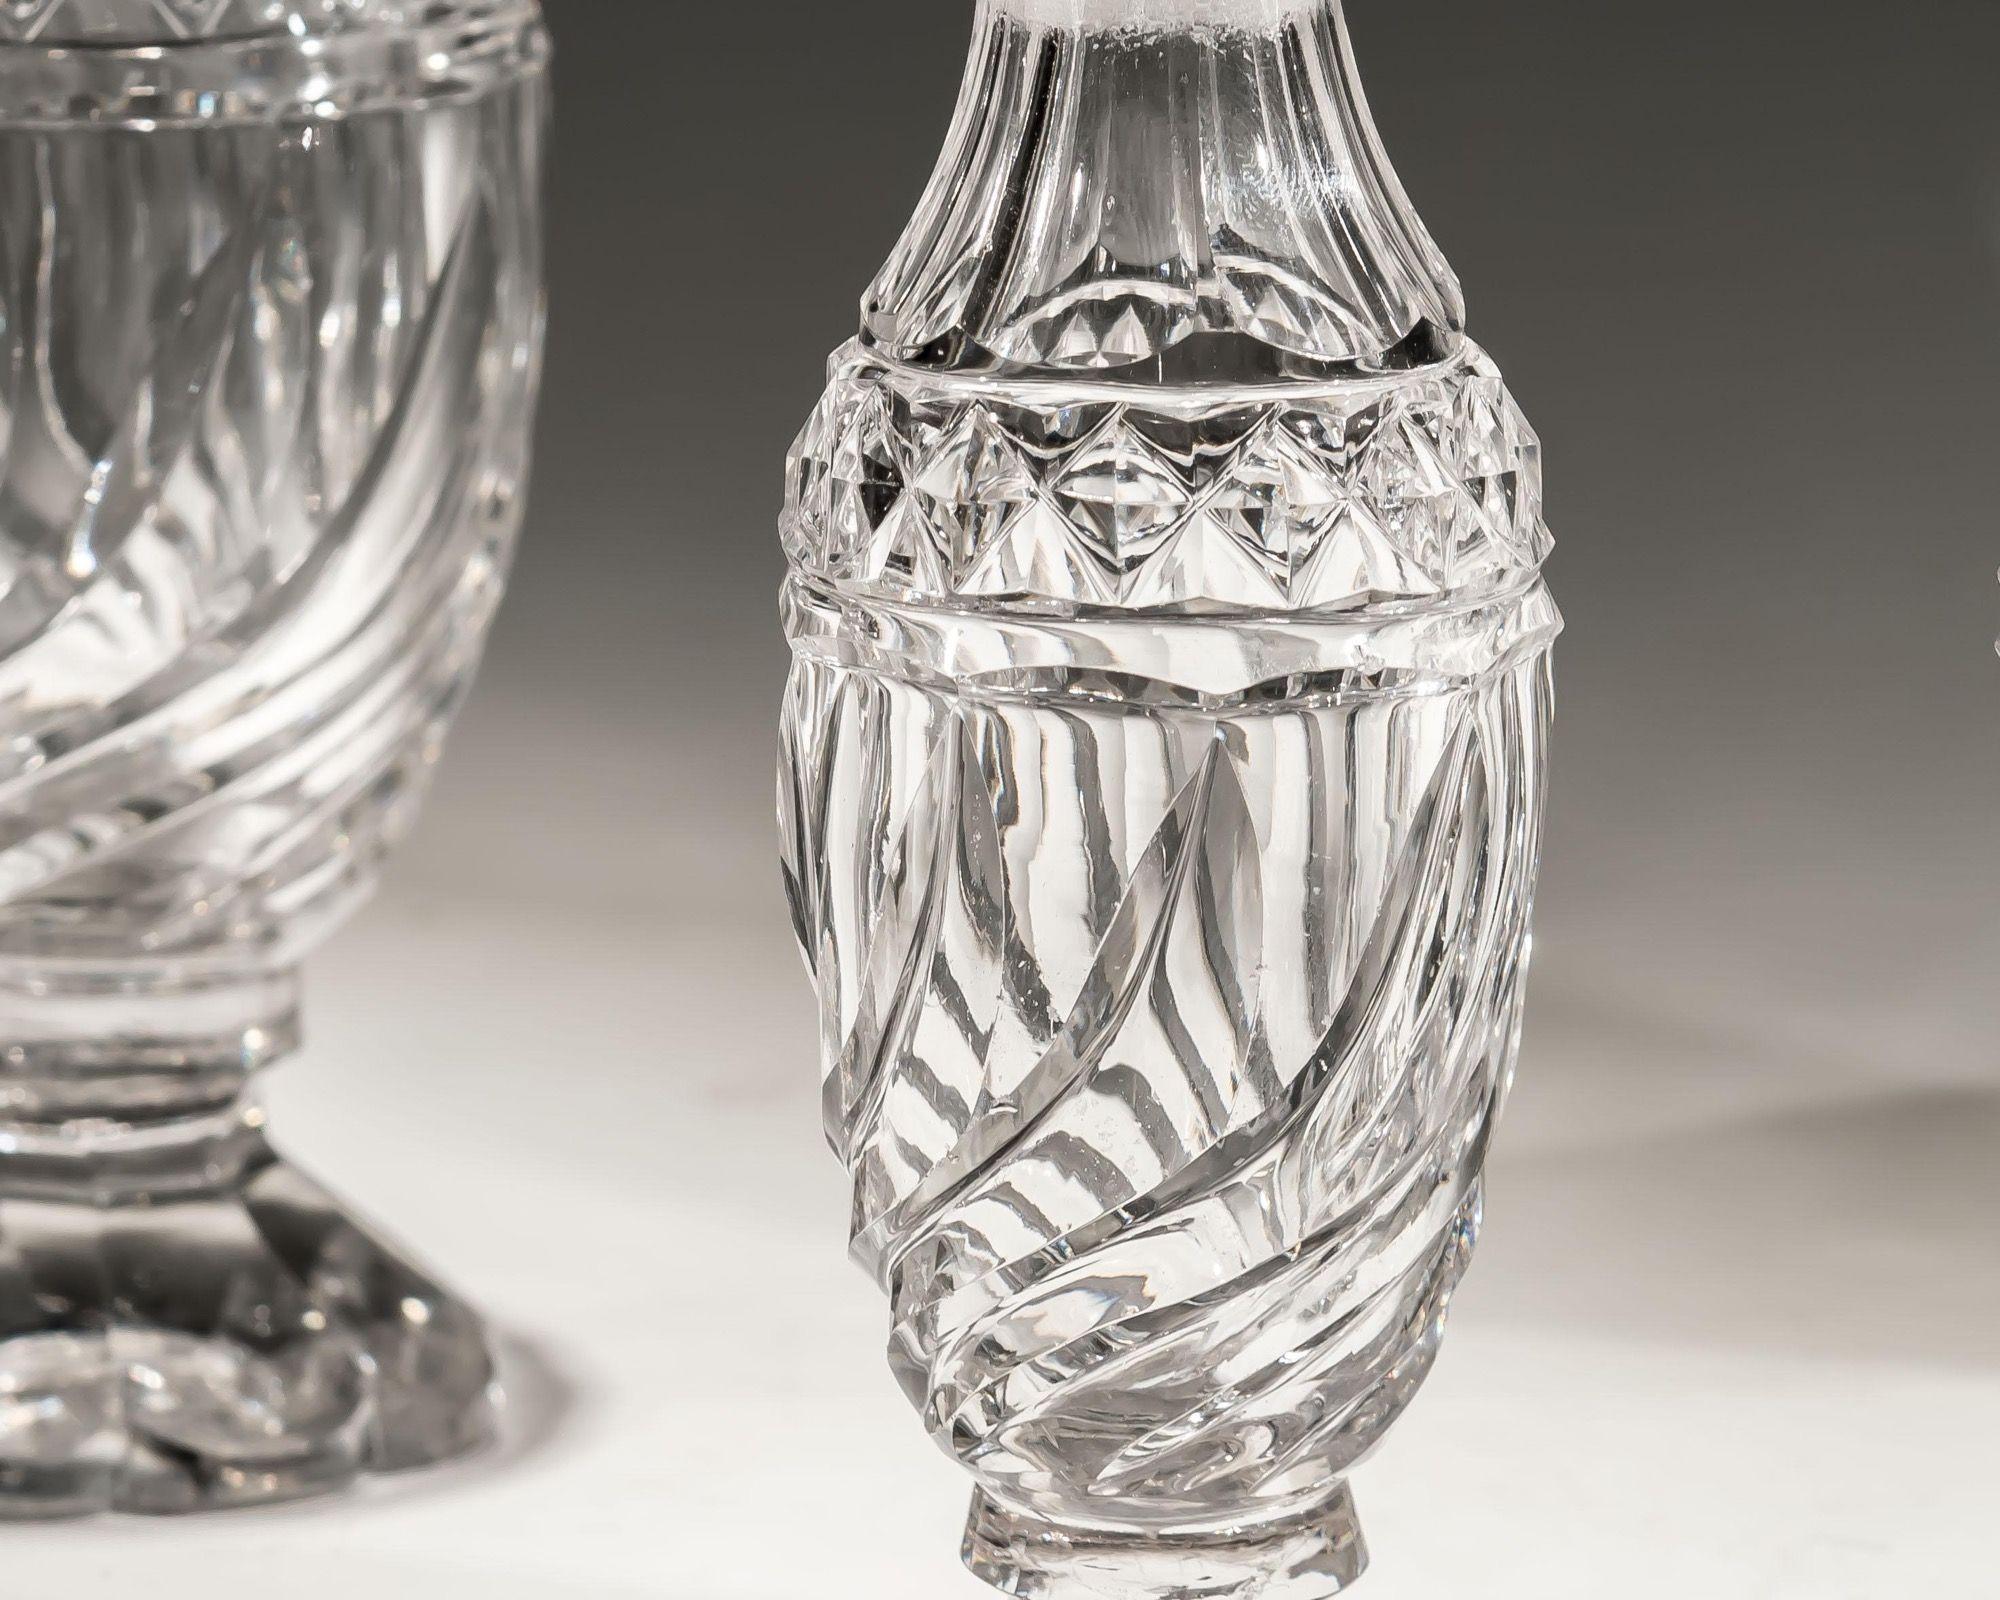 A suite of four Georgian cruet bottles with swirl cutting and a band of diamonds, with matching swirl cut stoppers. The suite consist of two large bottles and two smaller.

Small bottles
height: 16cm / 6 1/4